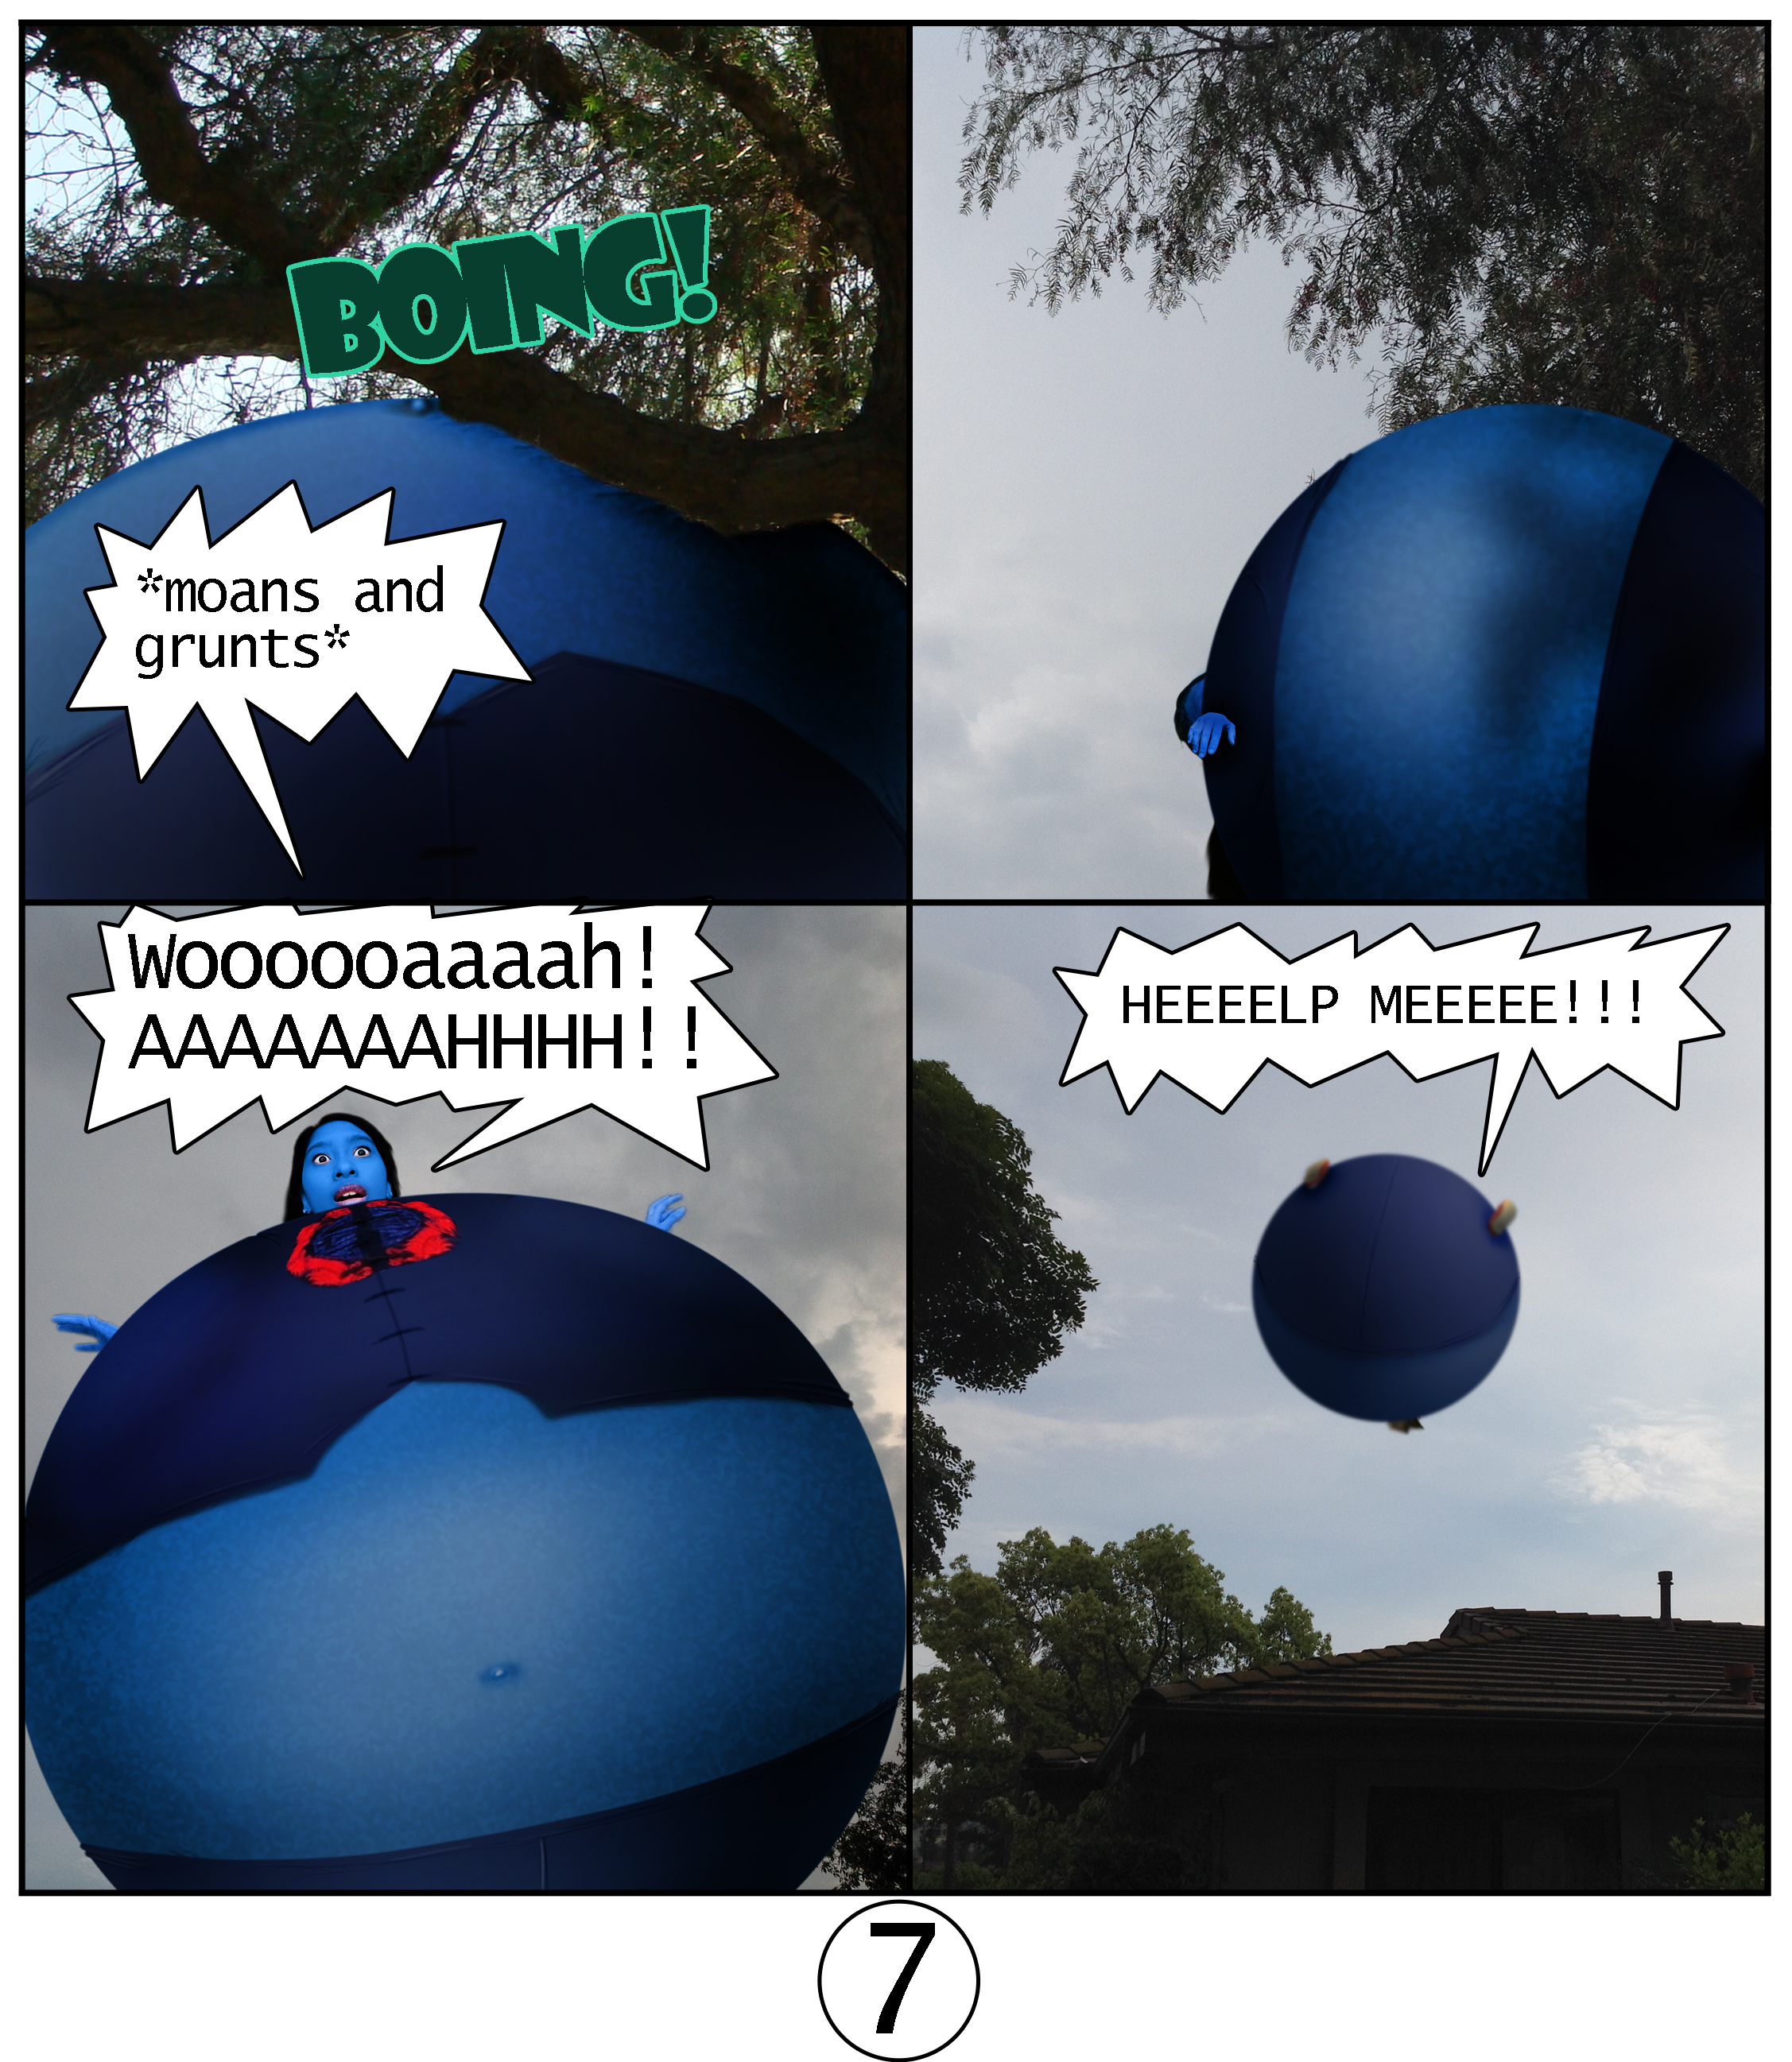 Blueberry inflation Kristina. Blueberry inflation. Chew it Kristina. Kristina inflation Blueberry Comics 1. Inflation real life